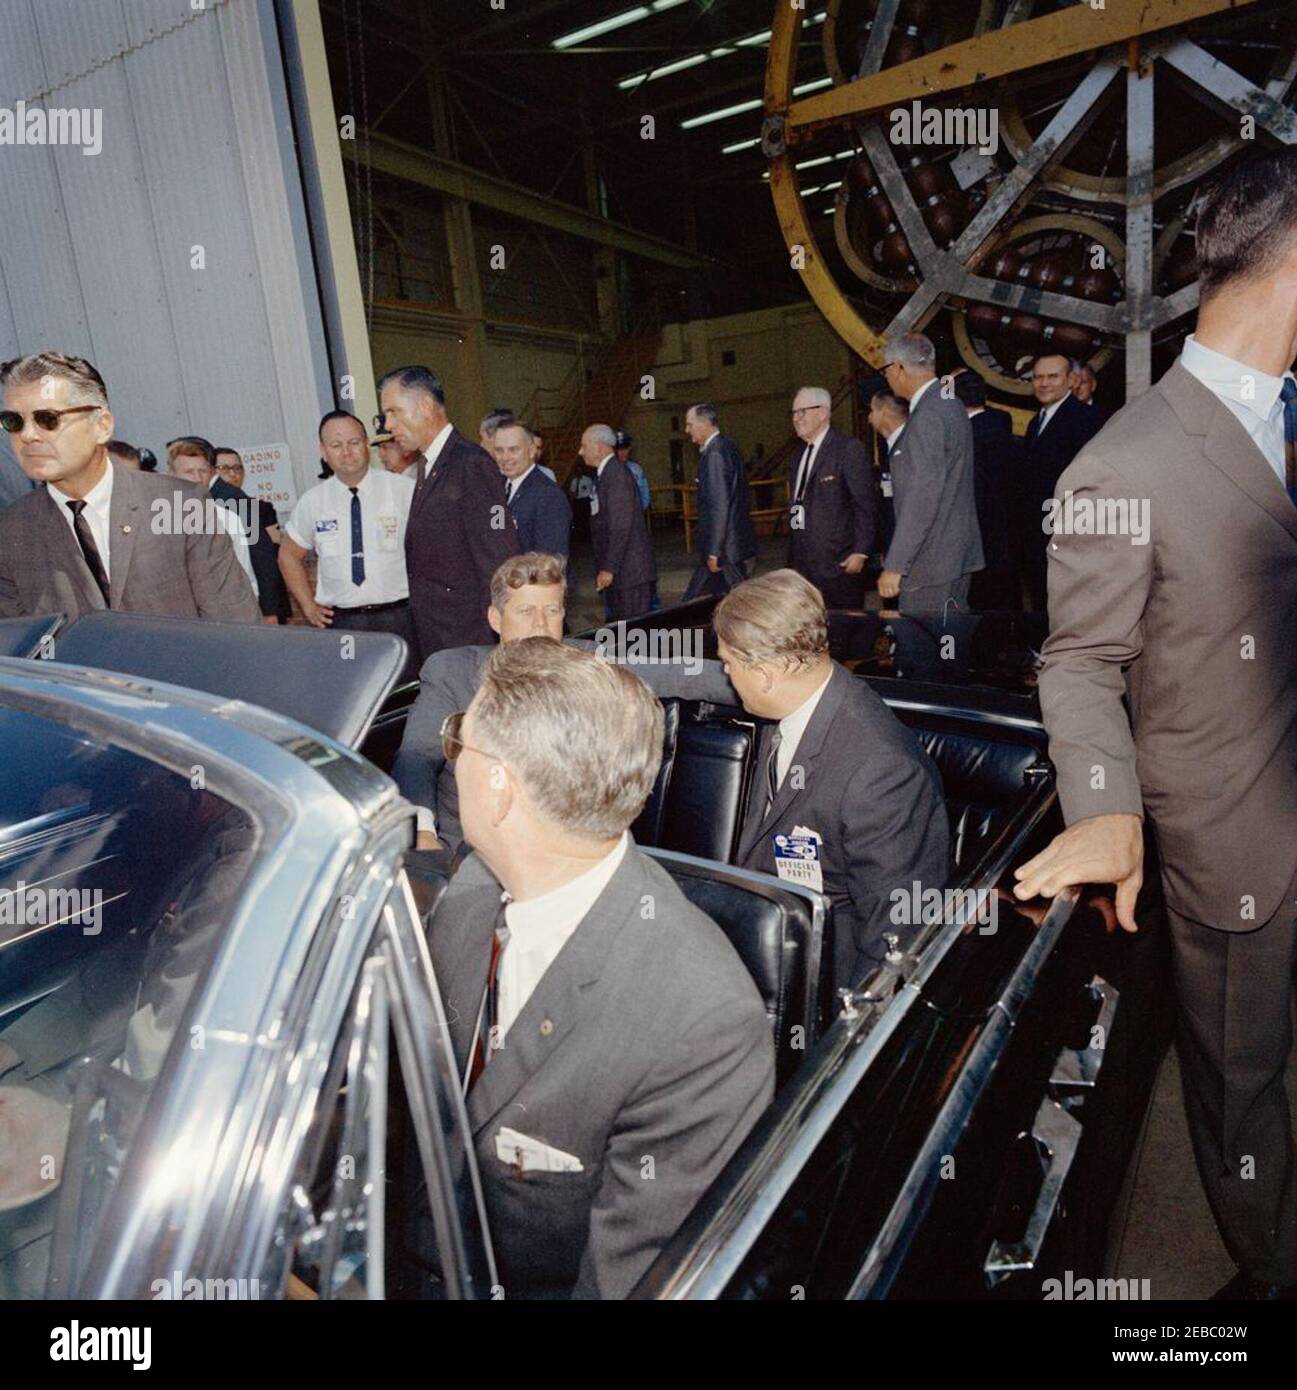 Inspection tour of NASA installations: Huntsville Alabama, Redstone Army Airfield and George C. Marshall Space Flight Center, 9:35AM. President John F. Kennedy and Director of the George C. Marshall Space Flight Center (MSFC), Dr. Wernher von Braun (back to camera), sit in the back seat of the presidential limousine, following a tour MSFC facilities at Redstone Arsenal, Huntsville, Alabama. Also pictured: Representative Albert Thomas (Texas); Representative George P. Miller (California); Associate Administrator of the National Aeronautics and Space Administration (NASA), Dr. Robert C. Seamans, Stock Photo